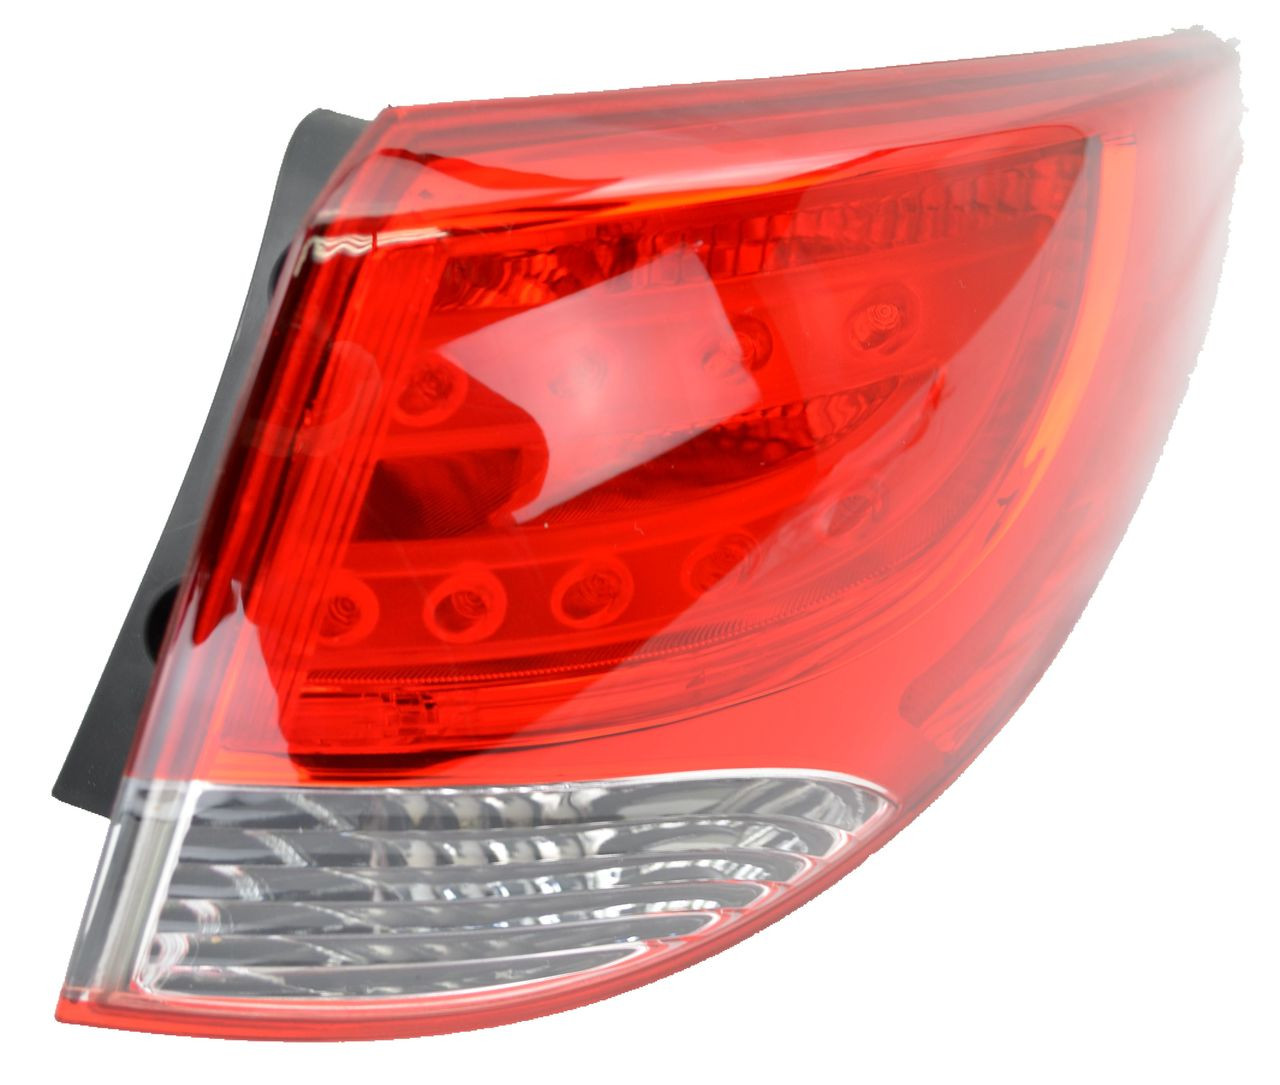 Tail light for Hyundai ix35 LM 11/09-05/15 New Right RHS Rear Lamp SUV 10 11 12 13